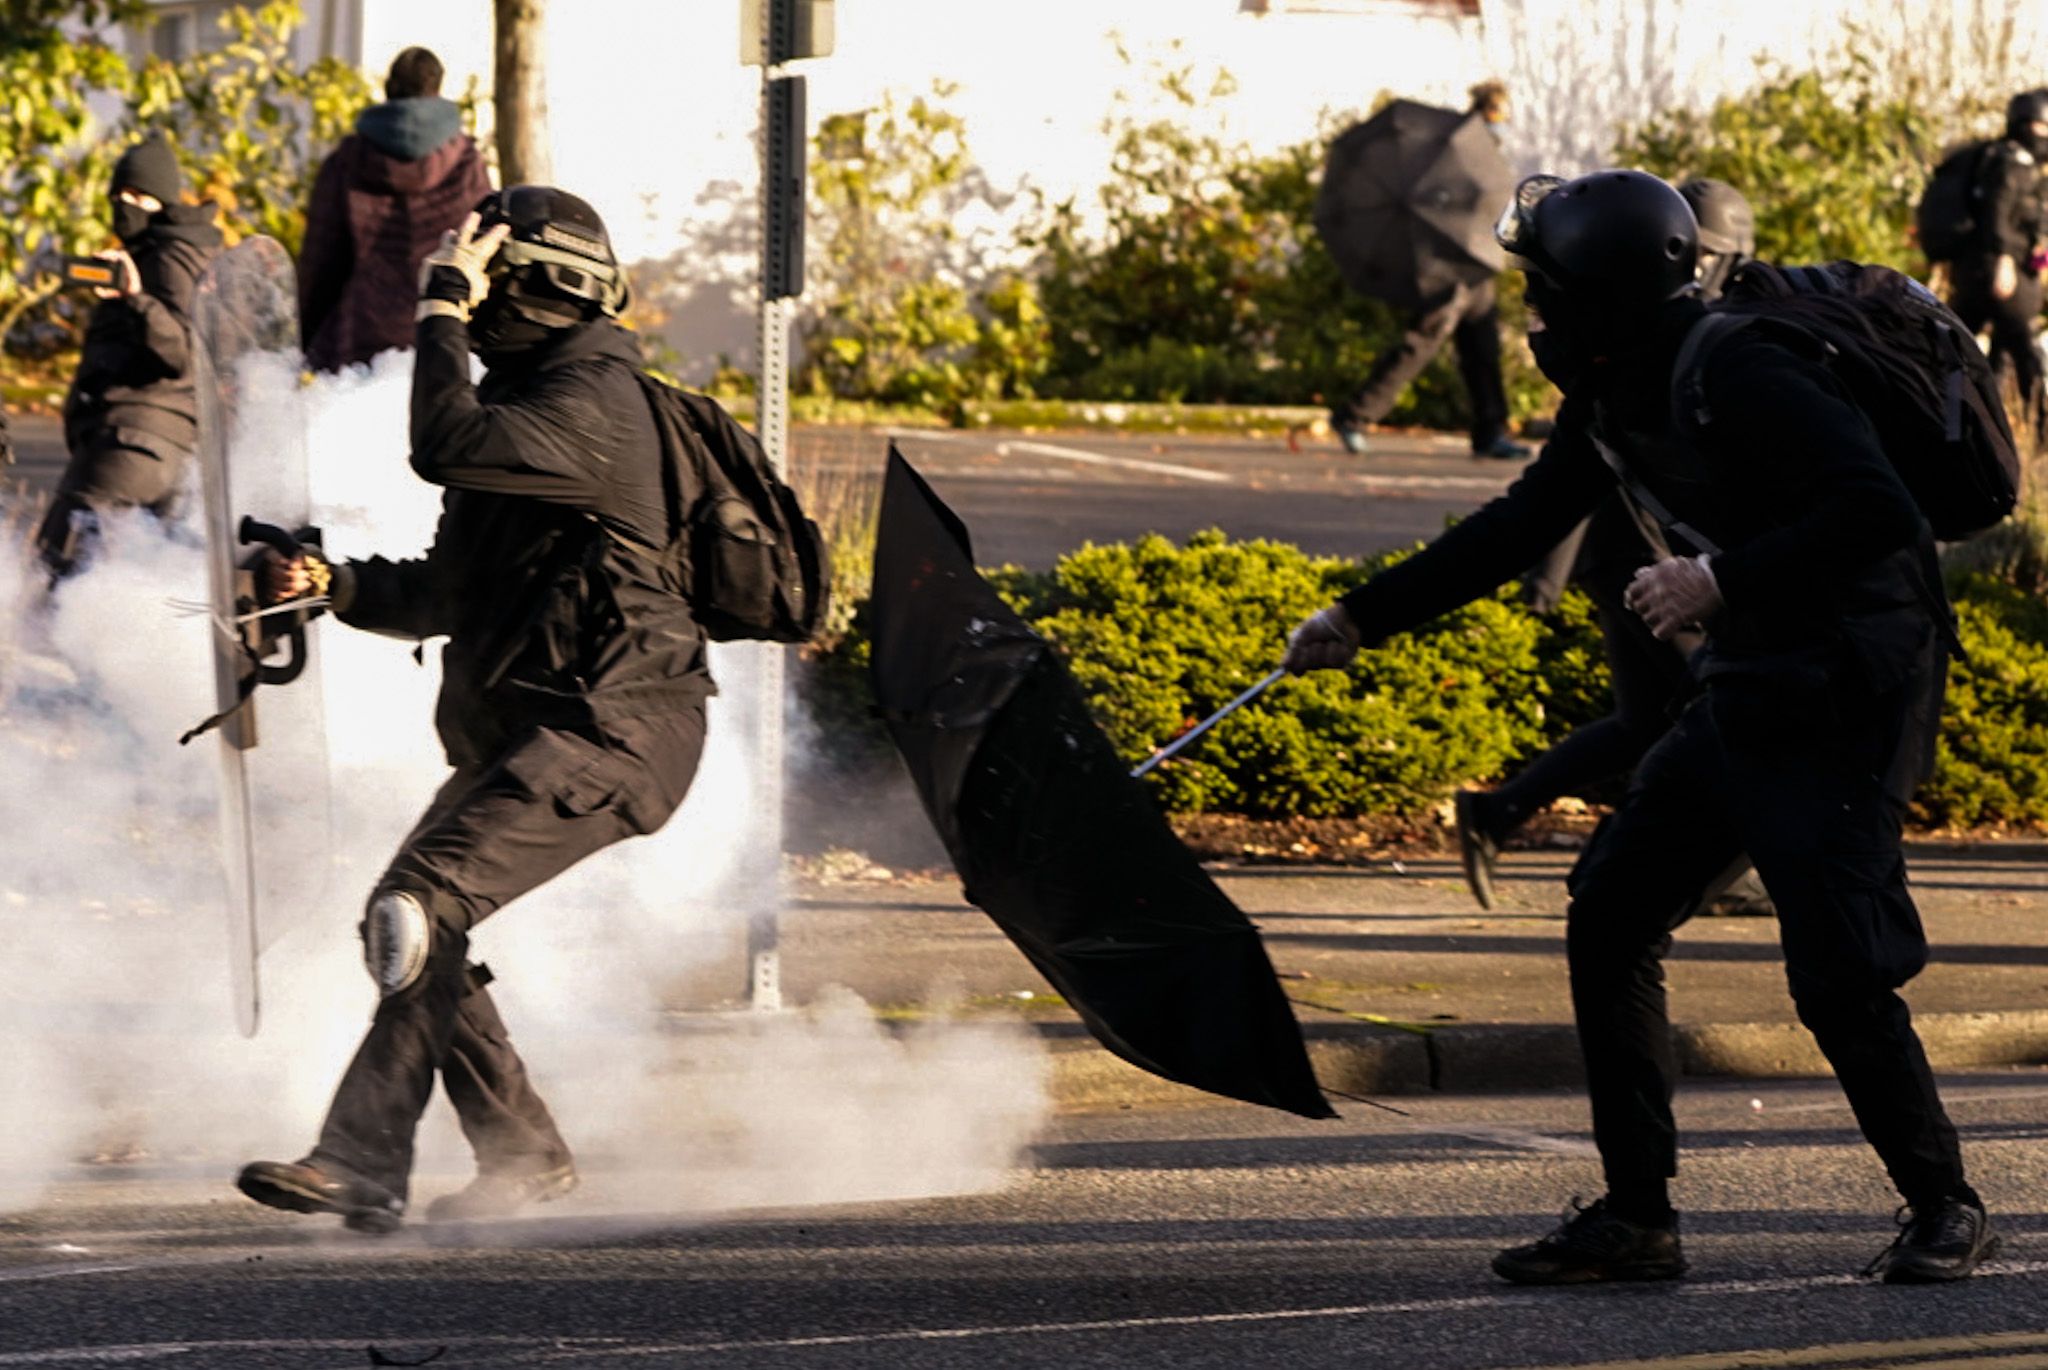 Anti-fascist protesters dodge police munitions during political clashes on December 12, 2020 in Olympia, Washington.